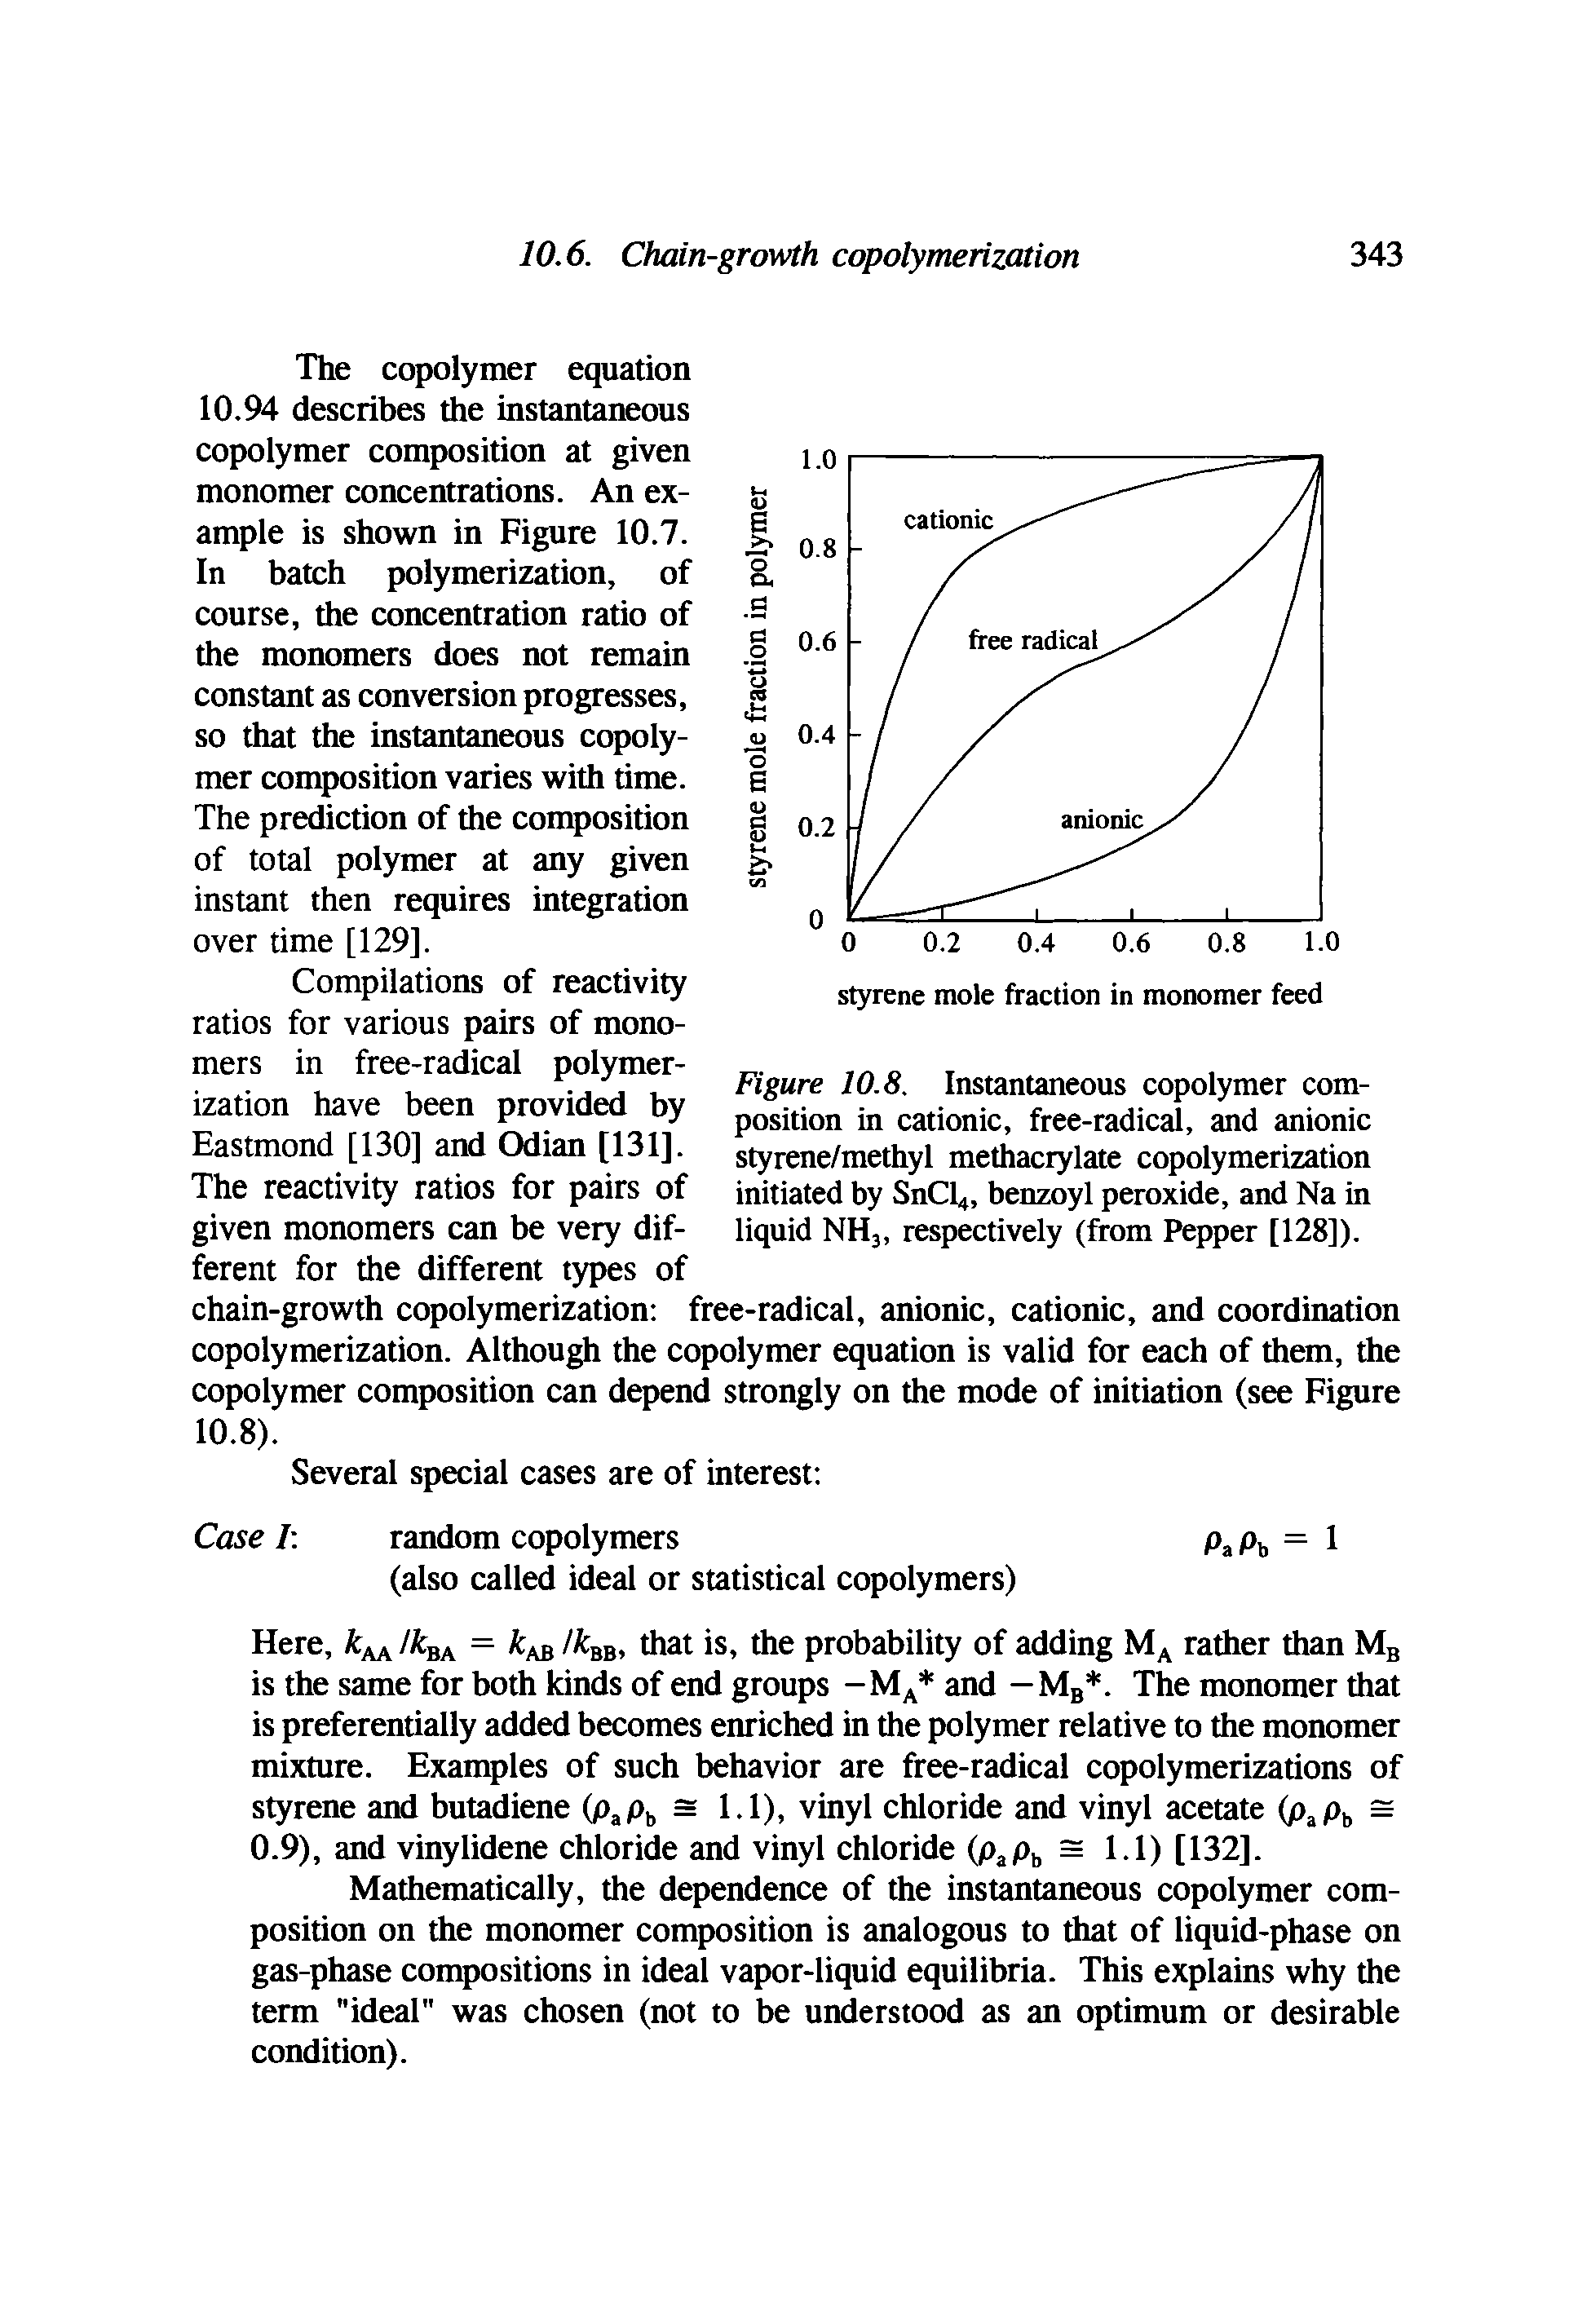 Figure 10.8. Instantaneous copolymer composition in cationic, free-radical, and anionic styrene/methyl methacrylate copolymerization initiated by SnCl4, benzoyl peroxide, and Na in liquid NH3, respectively (from Pepper [128]).